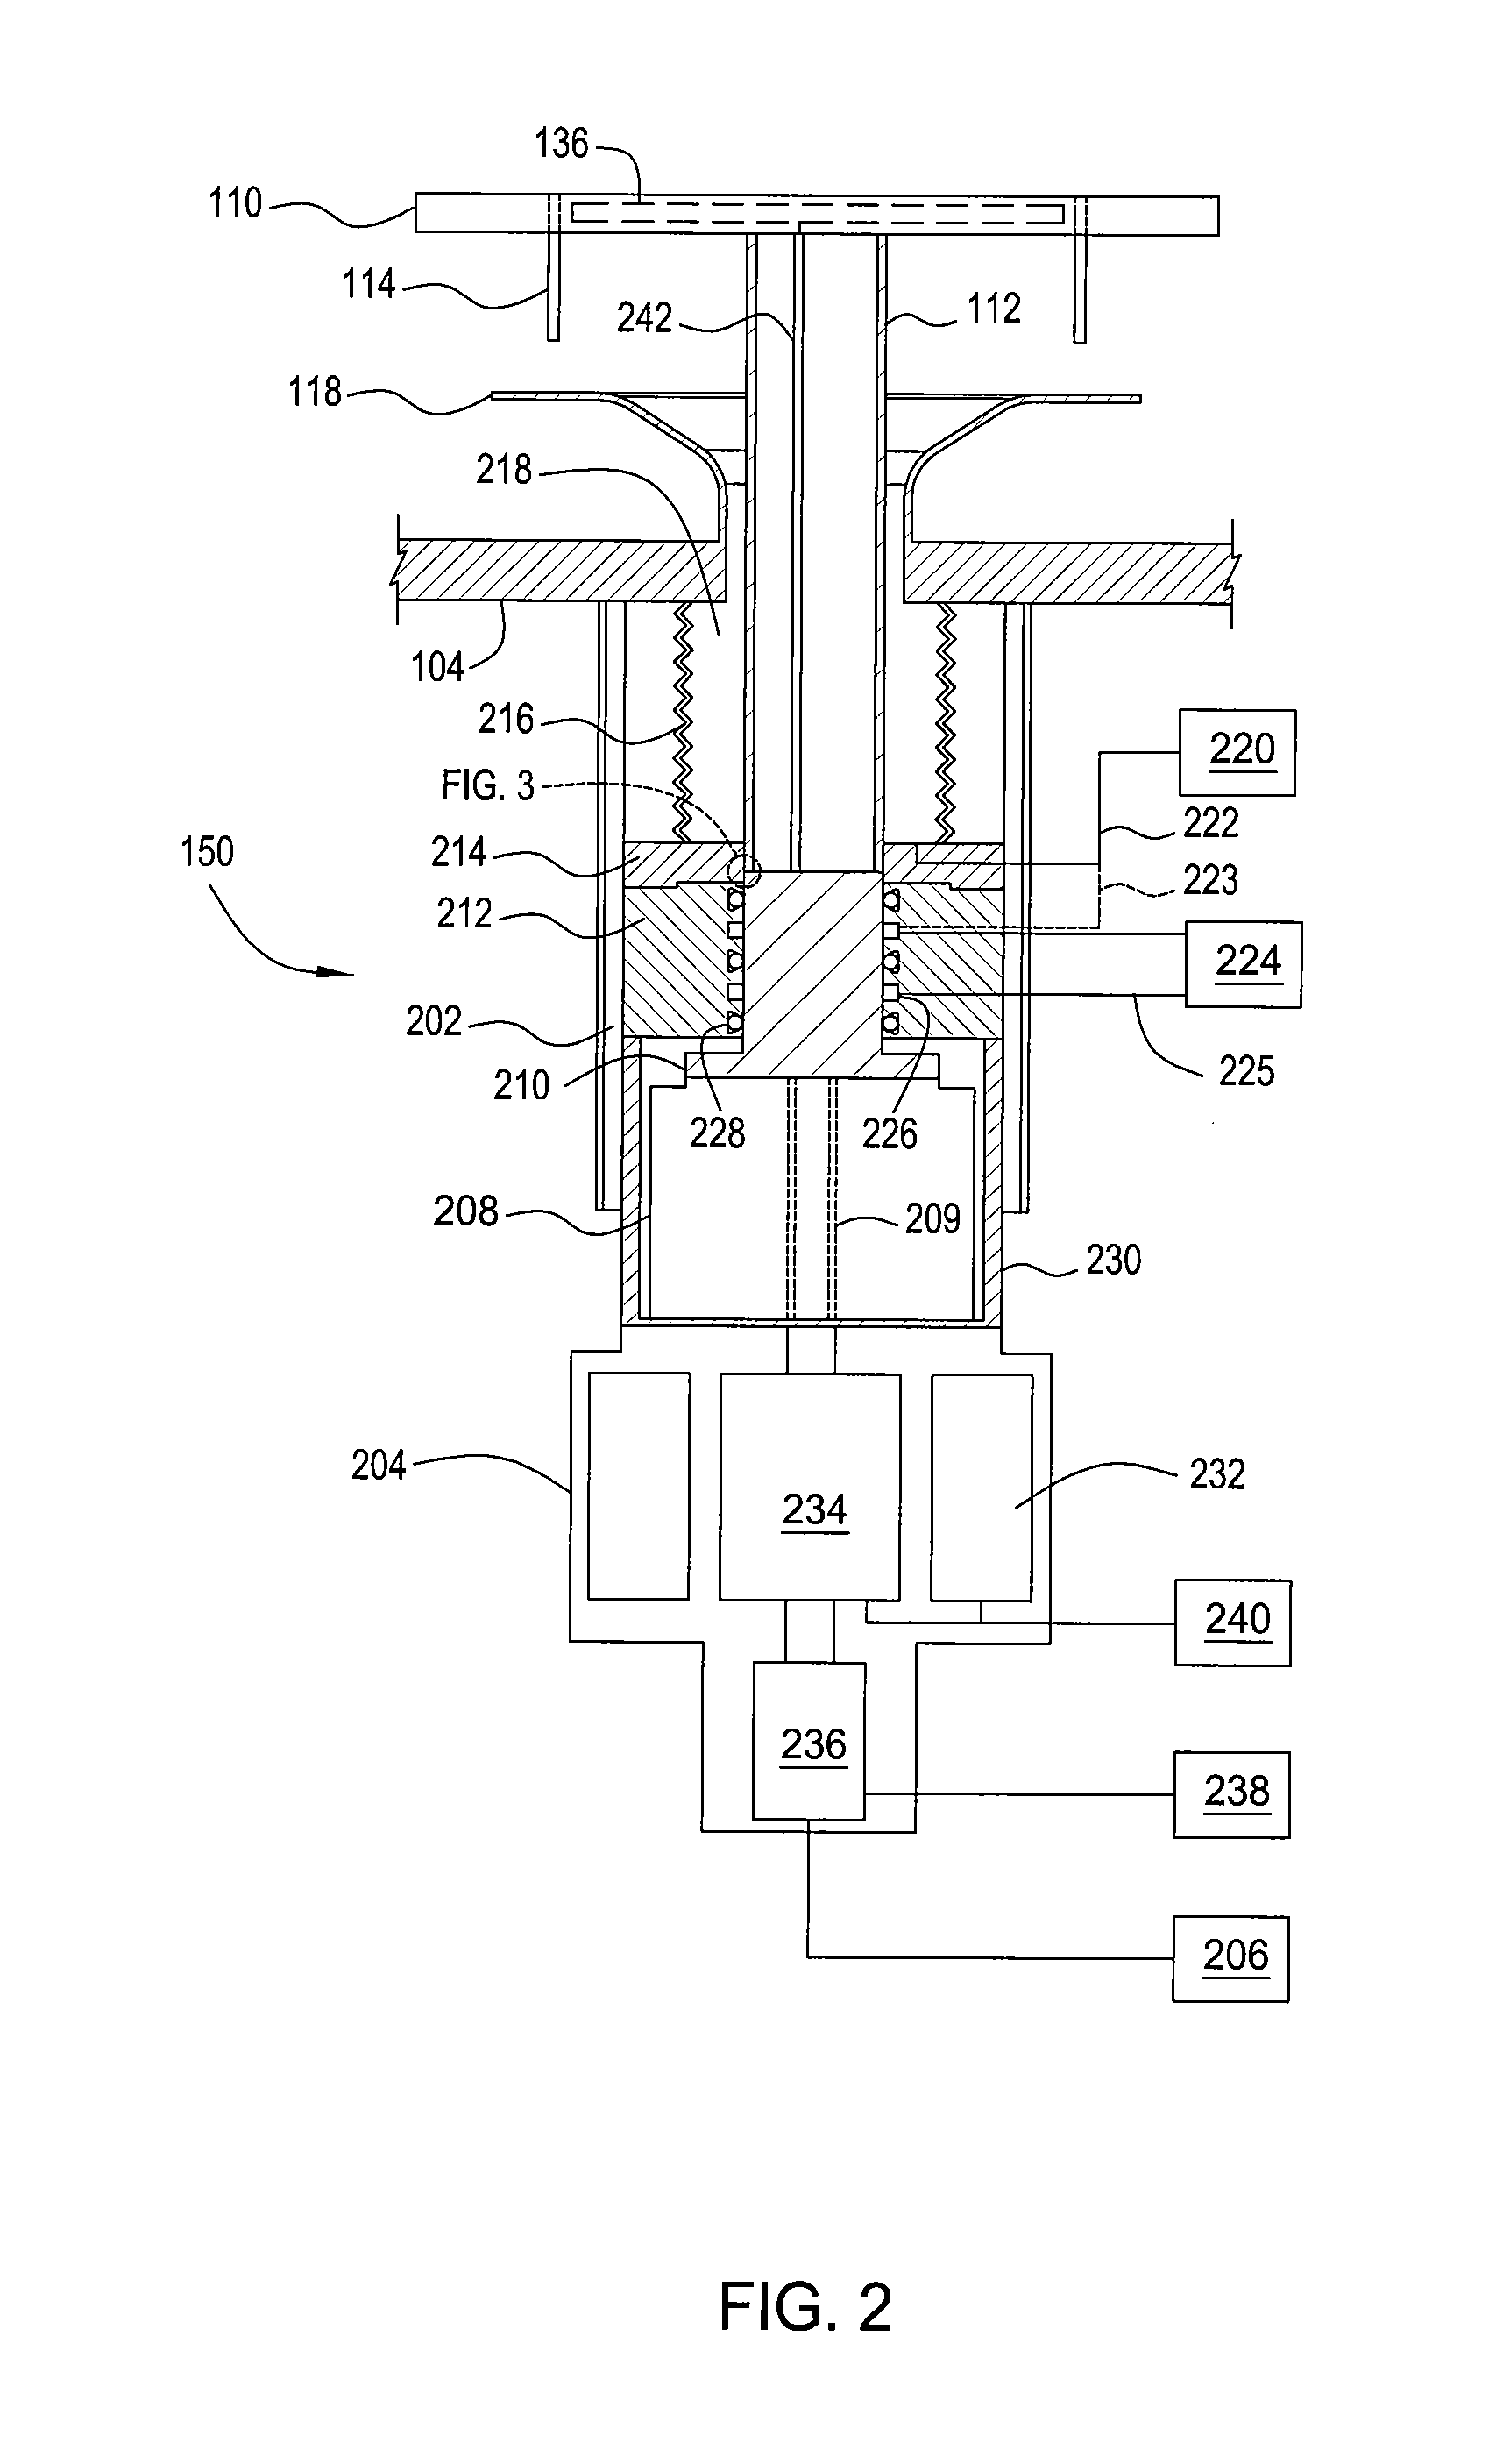 Rotating substrate support and methods of use